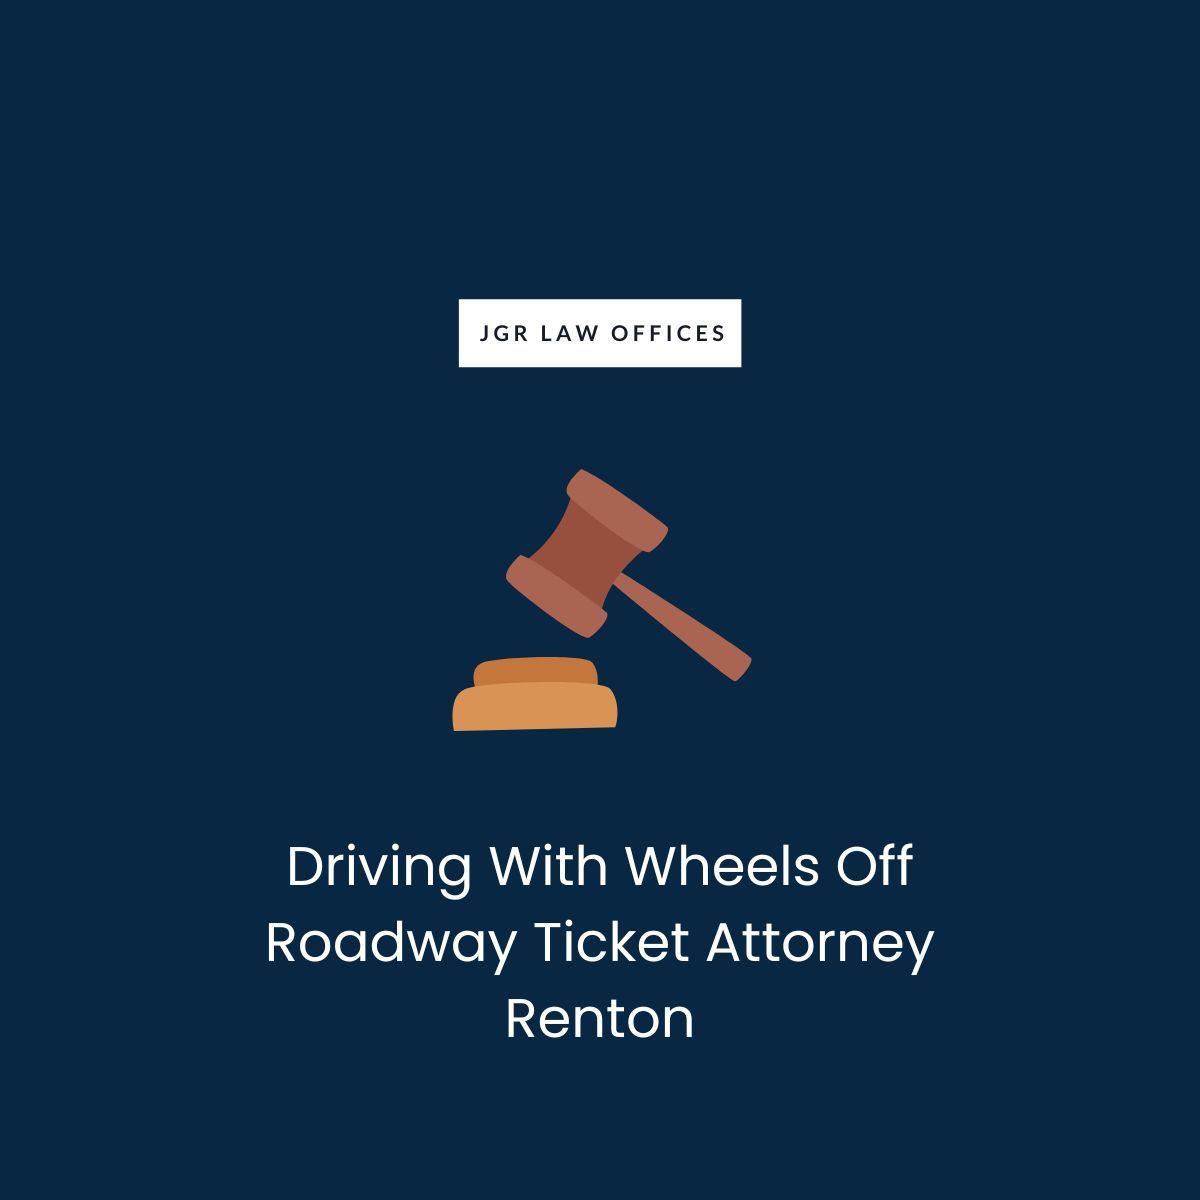 Driving With Wheels Off Roadway Ticket Attorney Renton